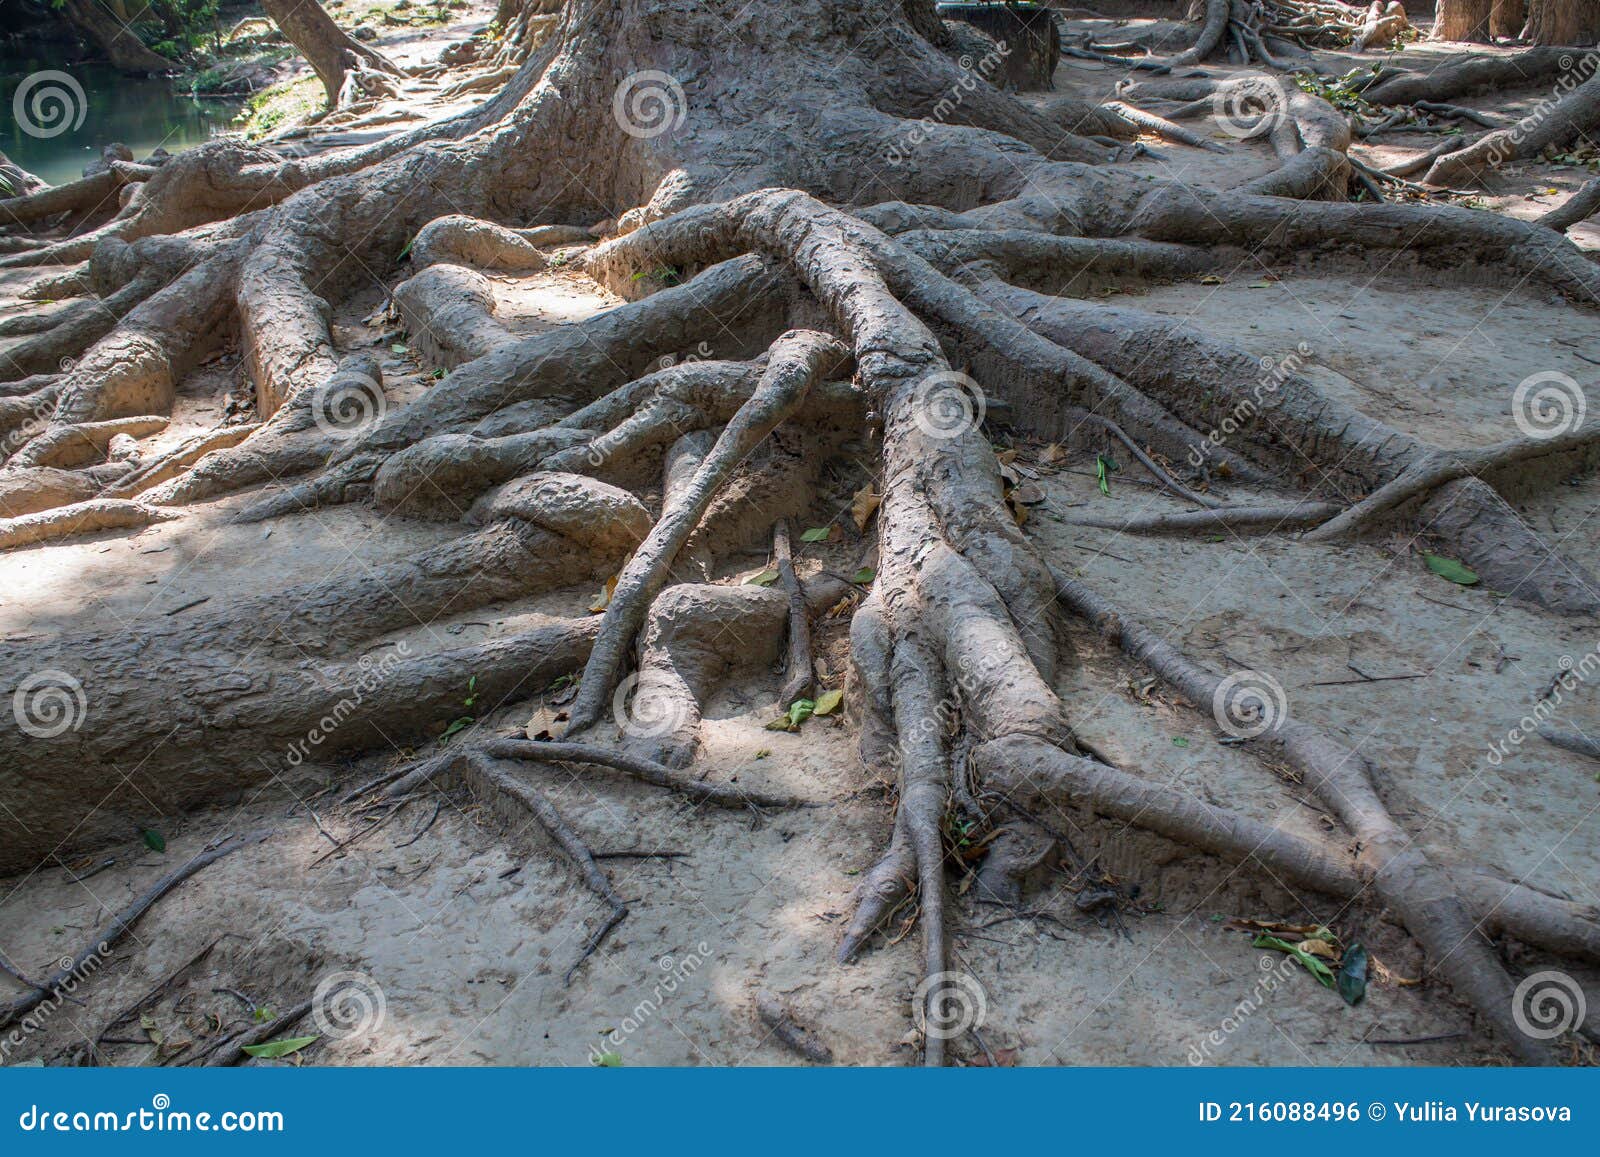 jungle forest mangrove tree roots in tropical rainforest